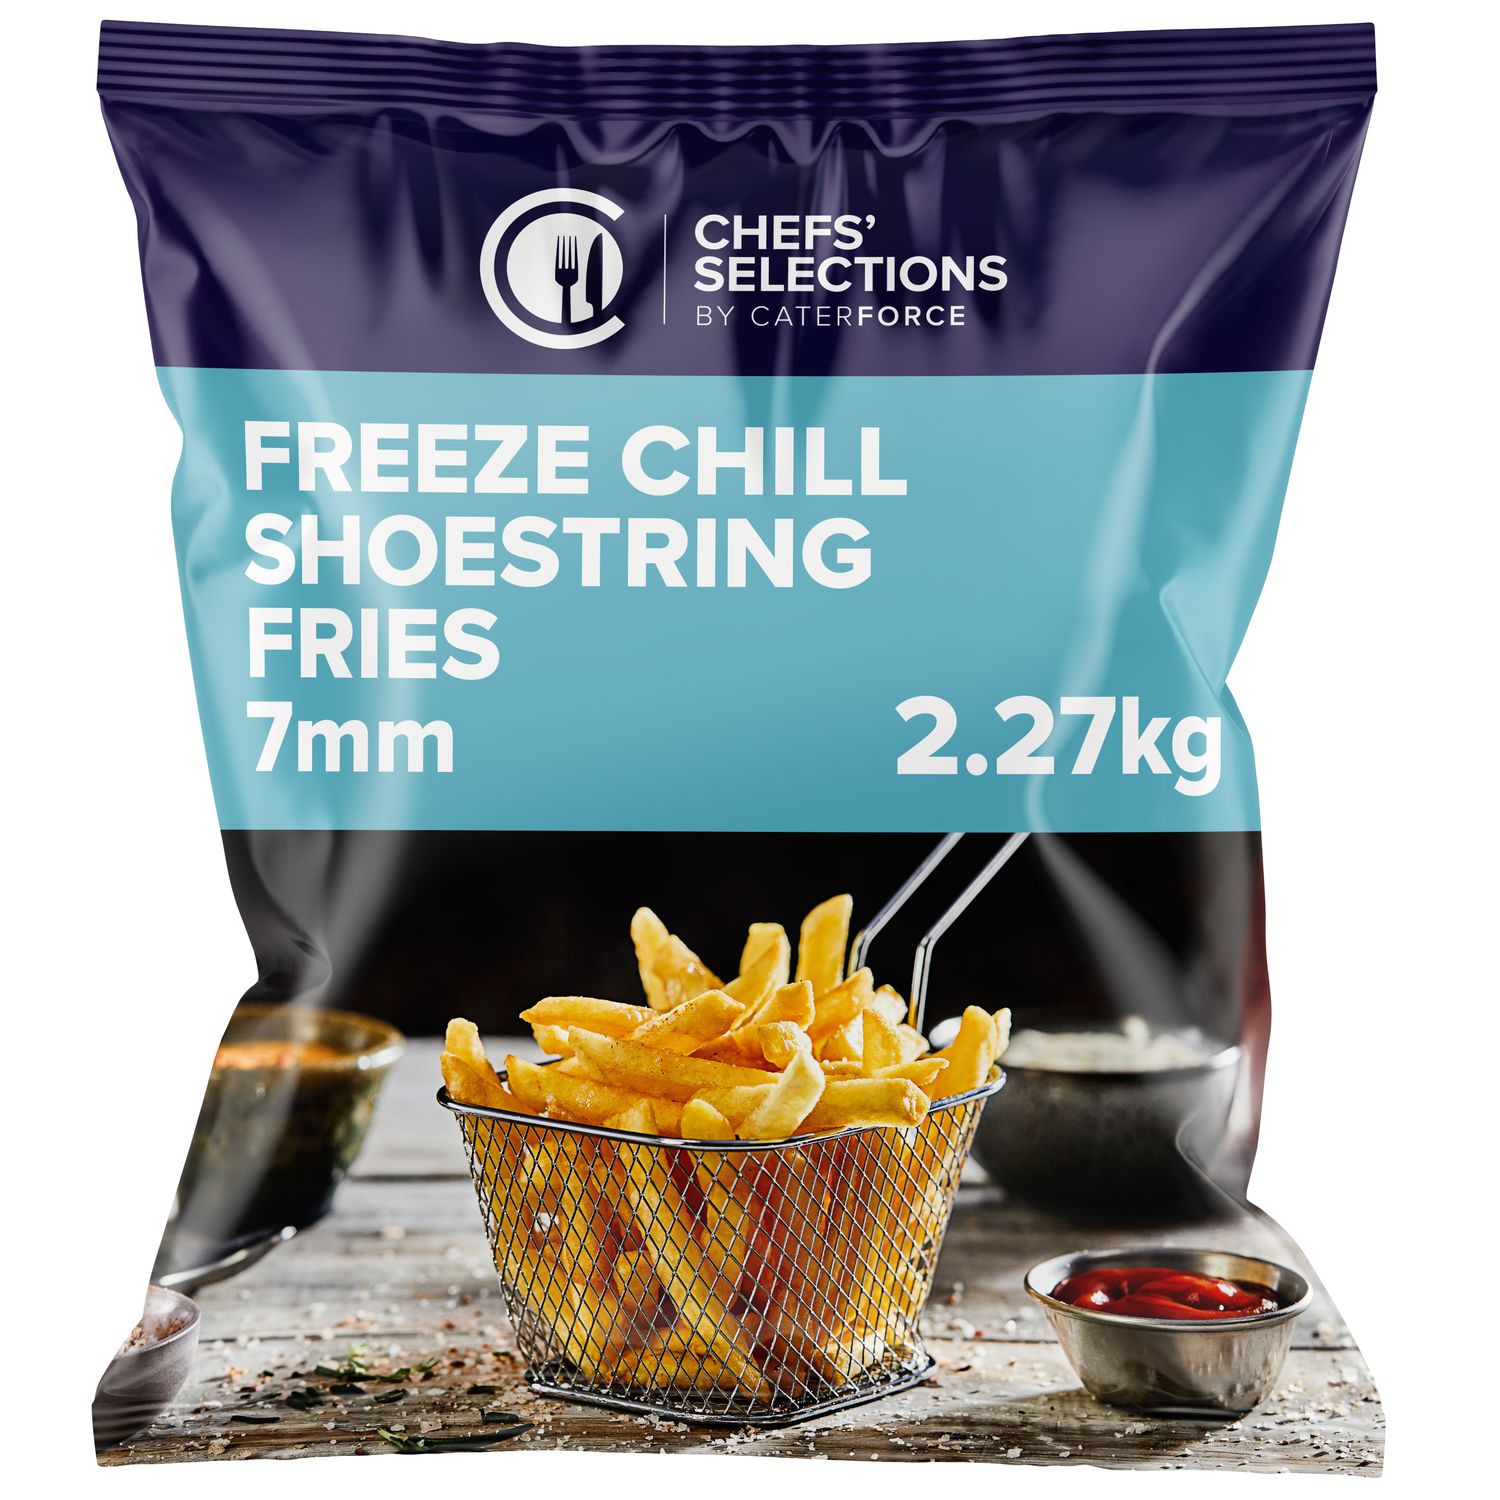 Chefs’ Selections Freeze Chill Shoestring 7mm Fries (4 x 2.27kg)